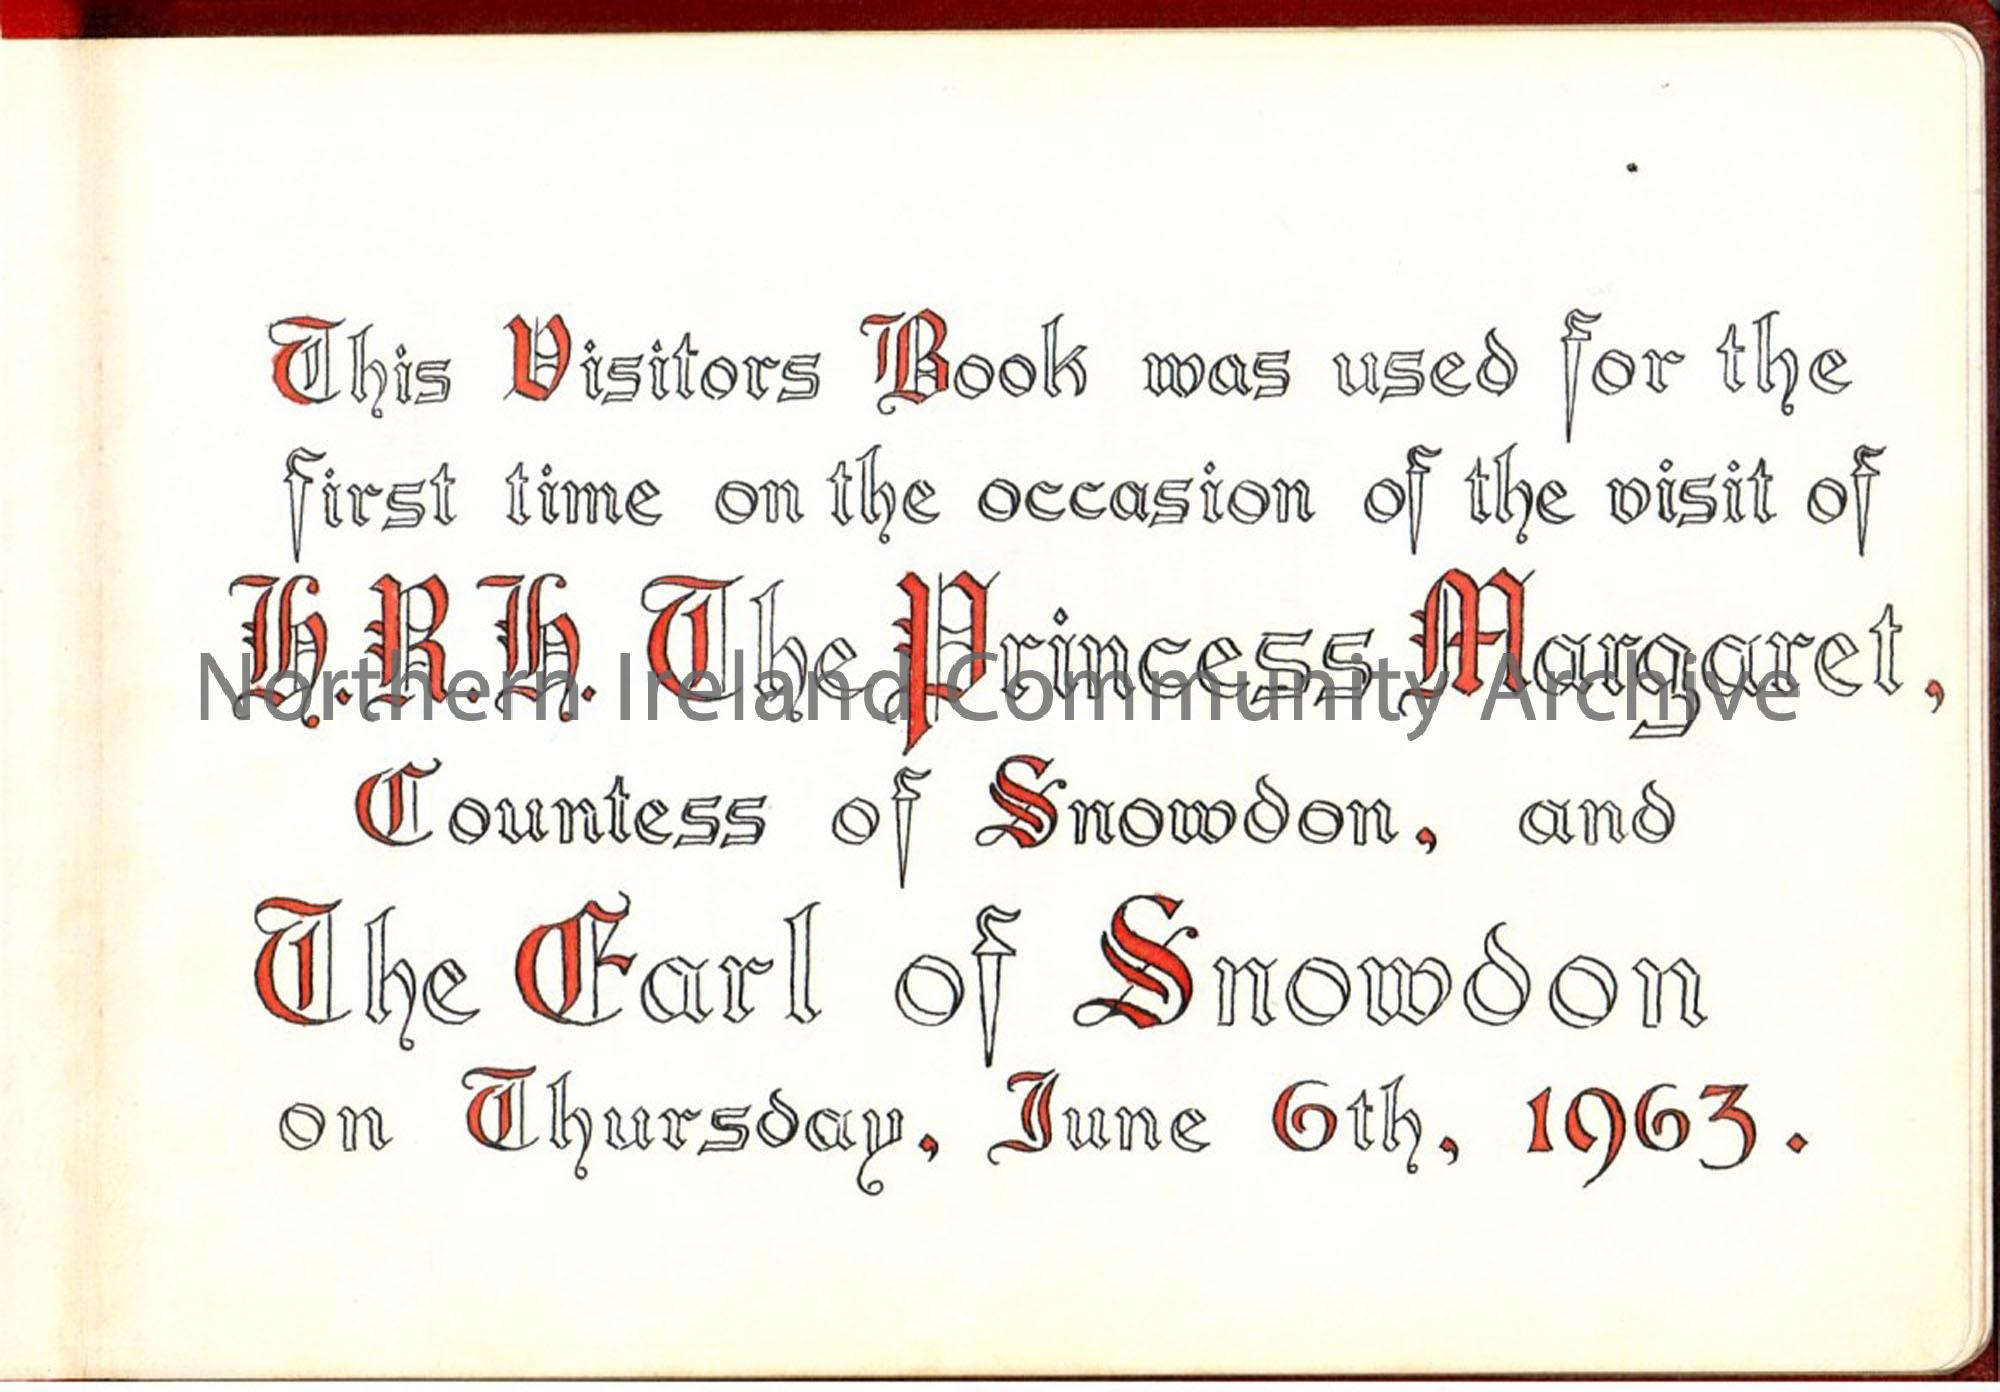 Coloured copy of pages from the Ballymoney Urban District Council visitors book, used for the first time on the occasion of the visit of H.R.H The Pri…